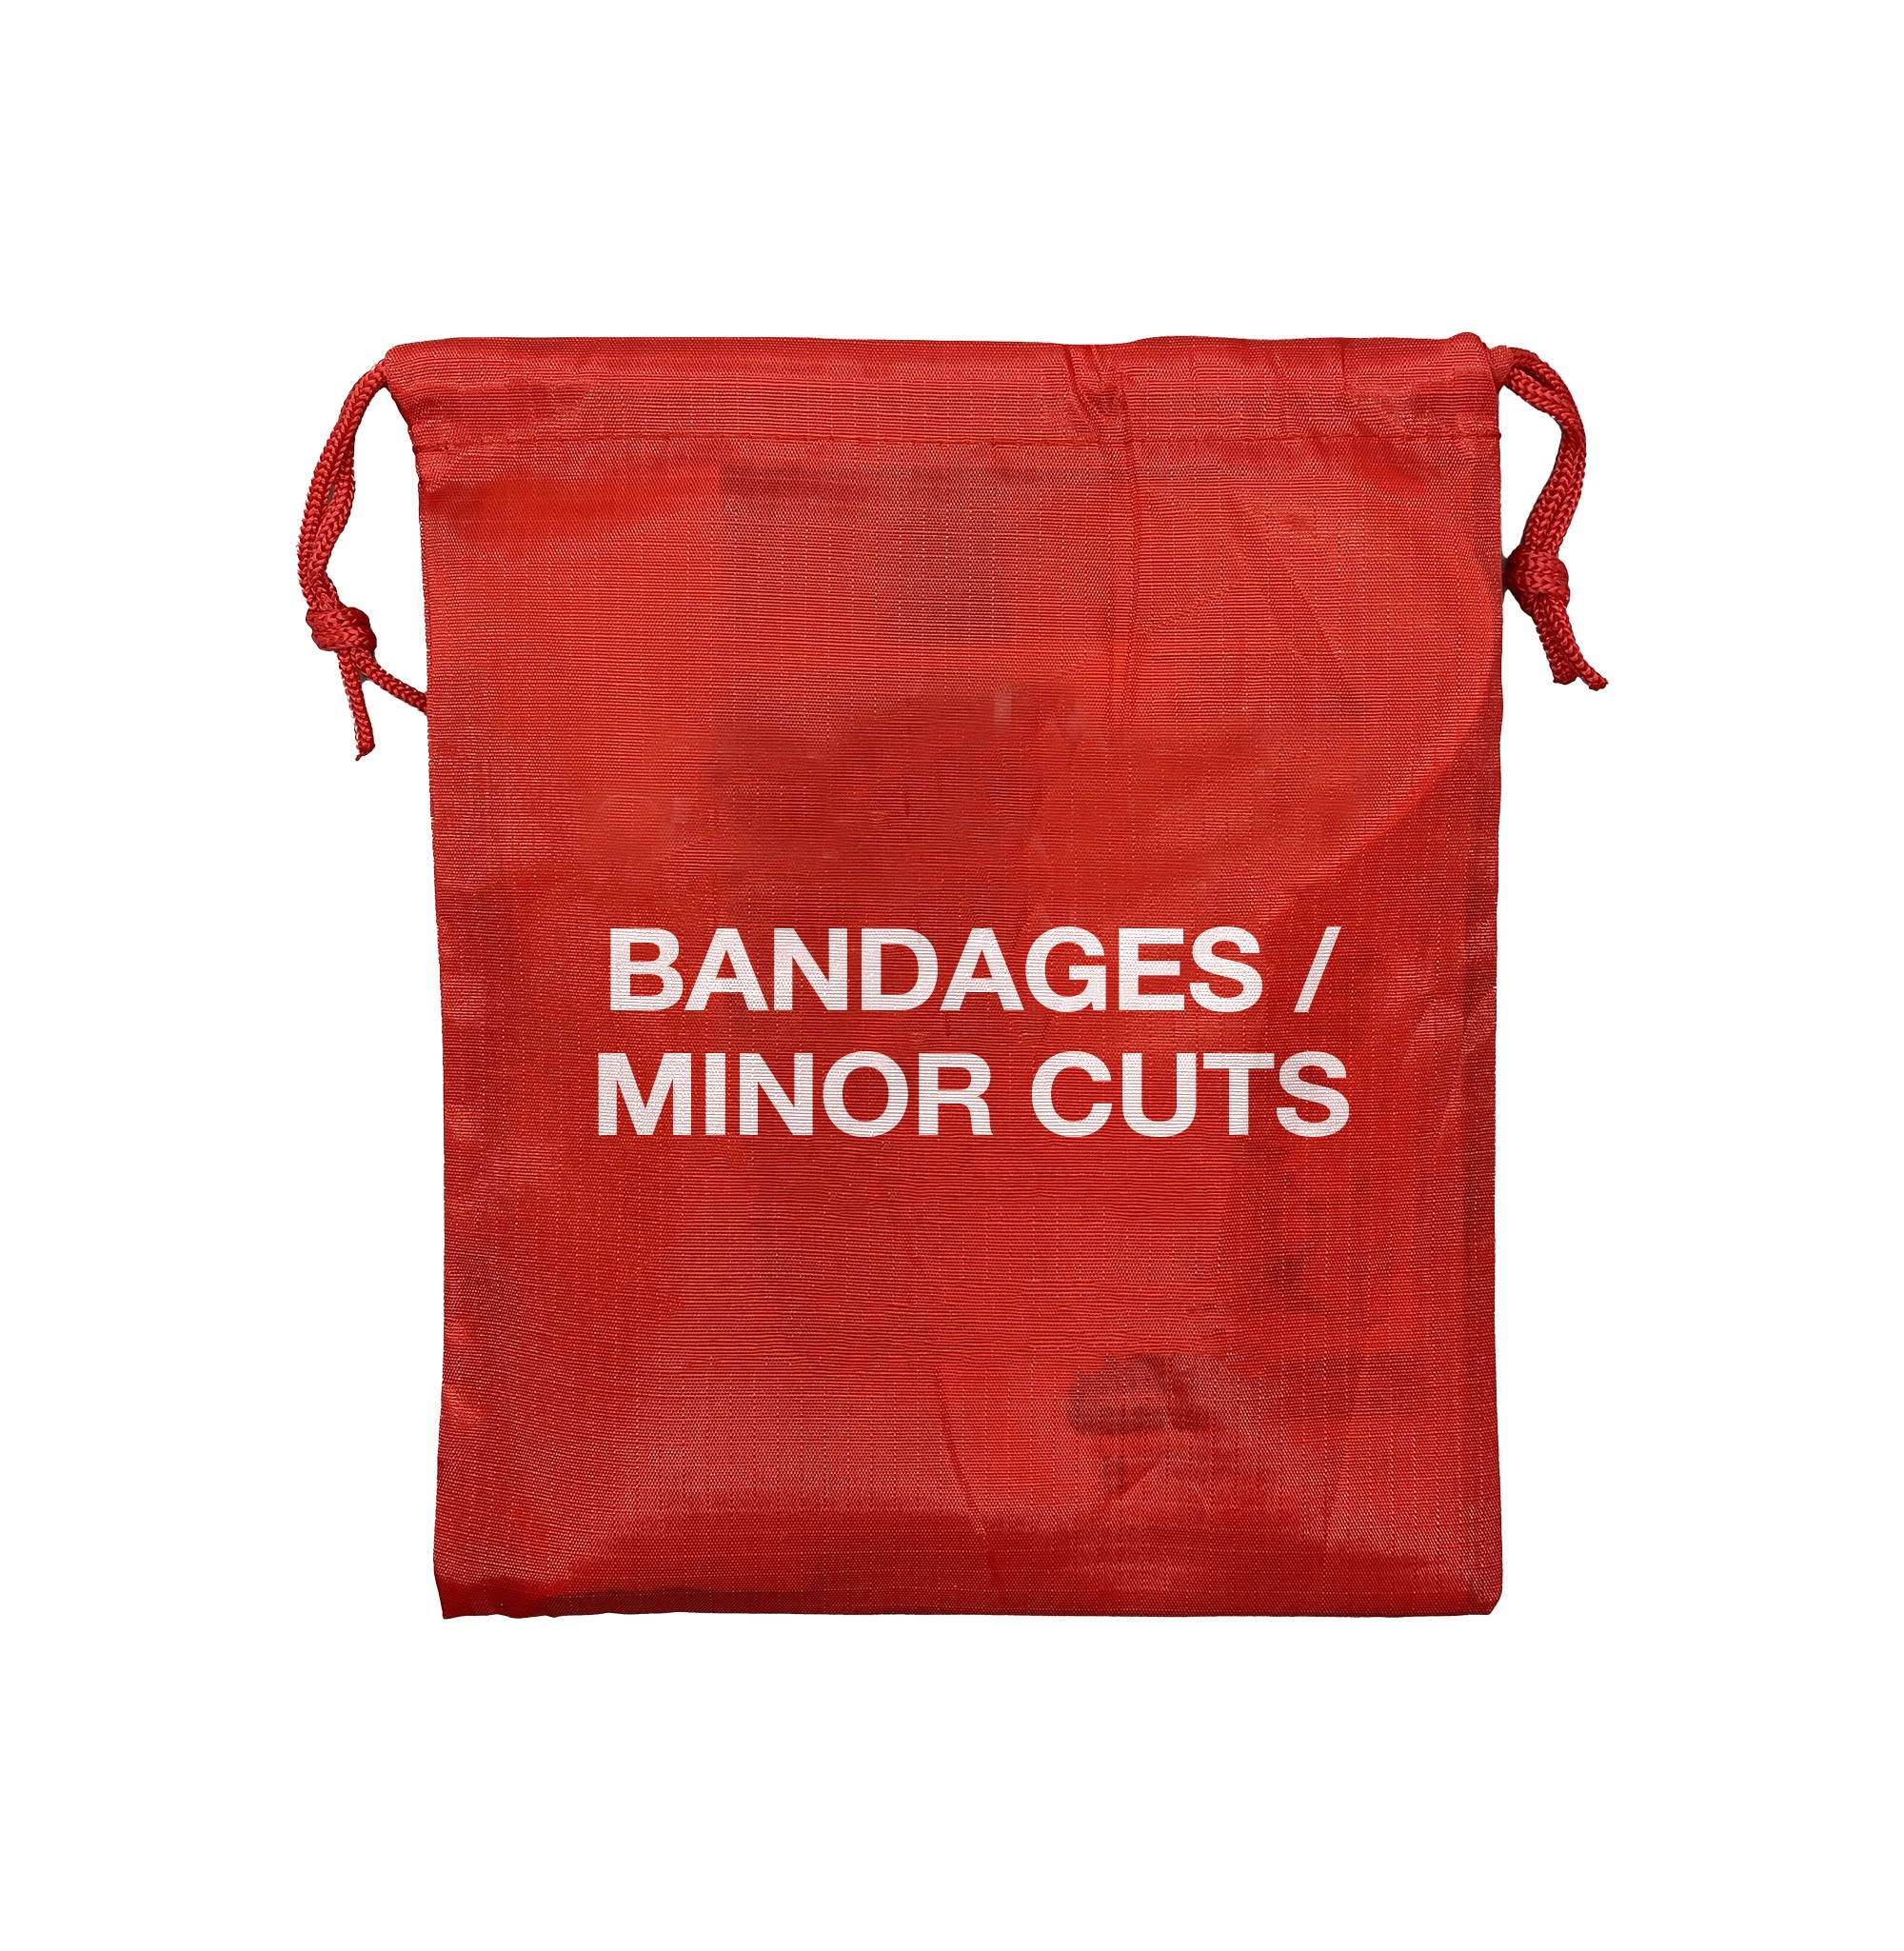 Bandages / Minor Cuts Pouch